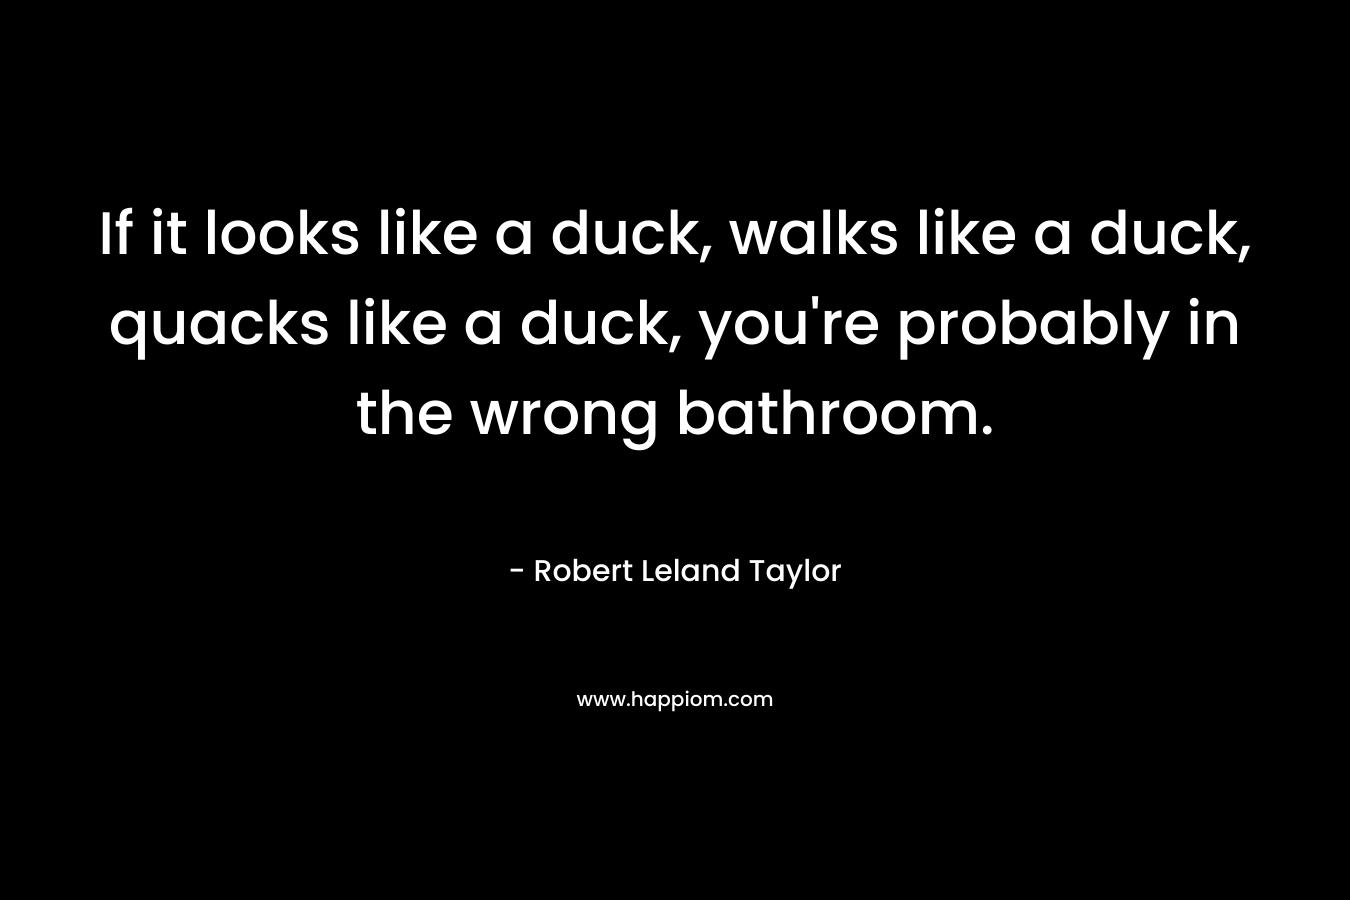 If it looks like a duck, walks like a duck, quacks like a duck, you're probably in the wrong bathroom.